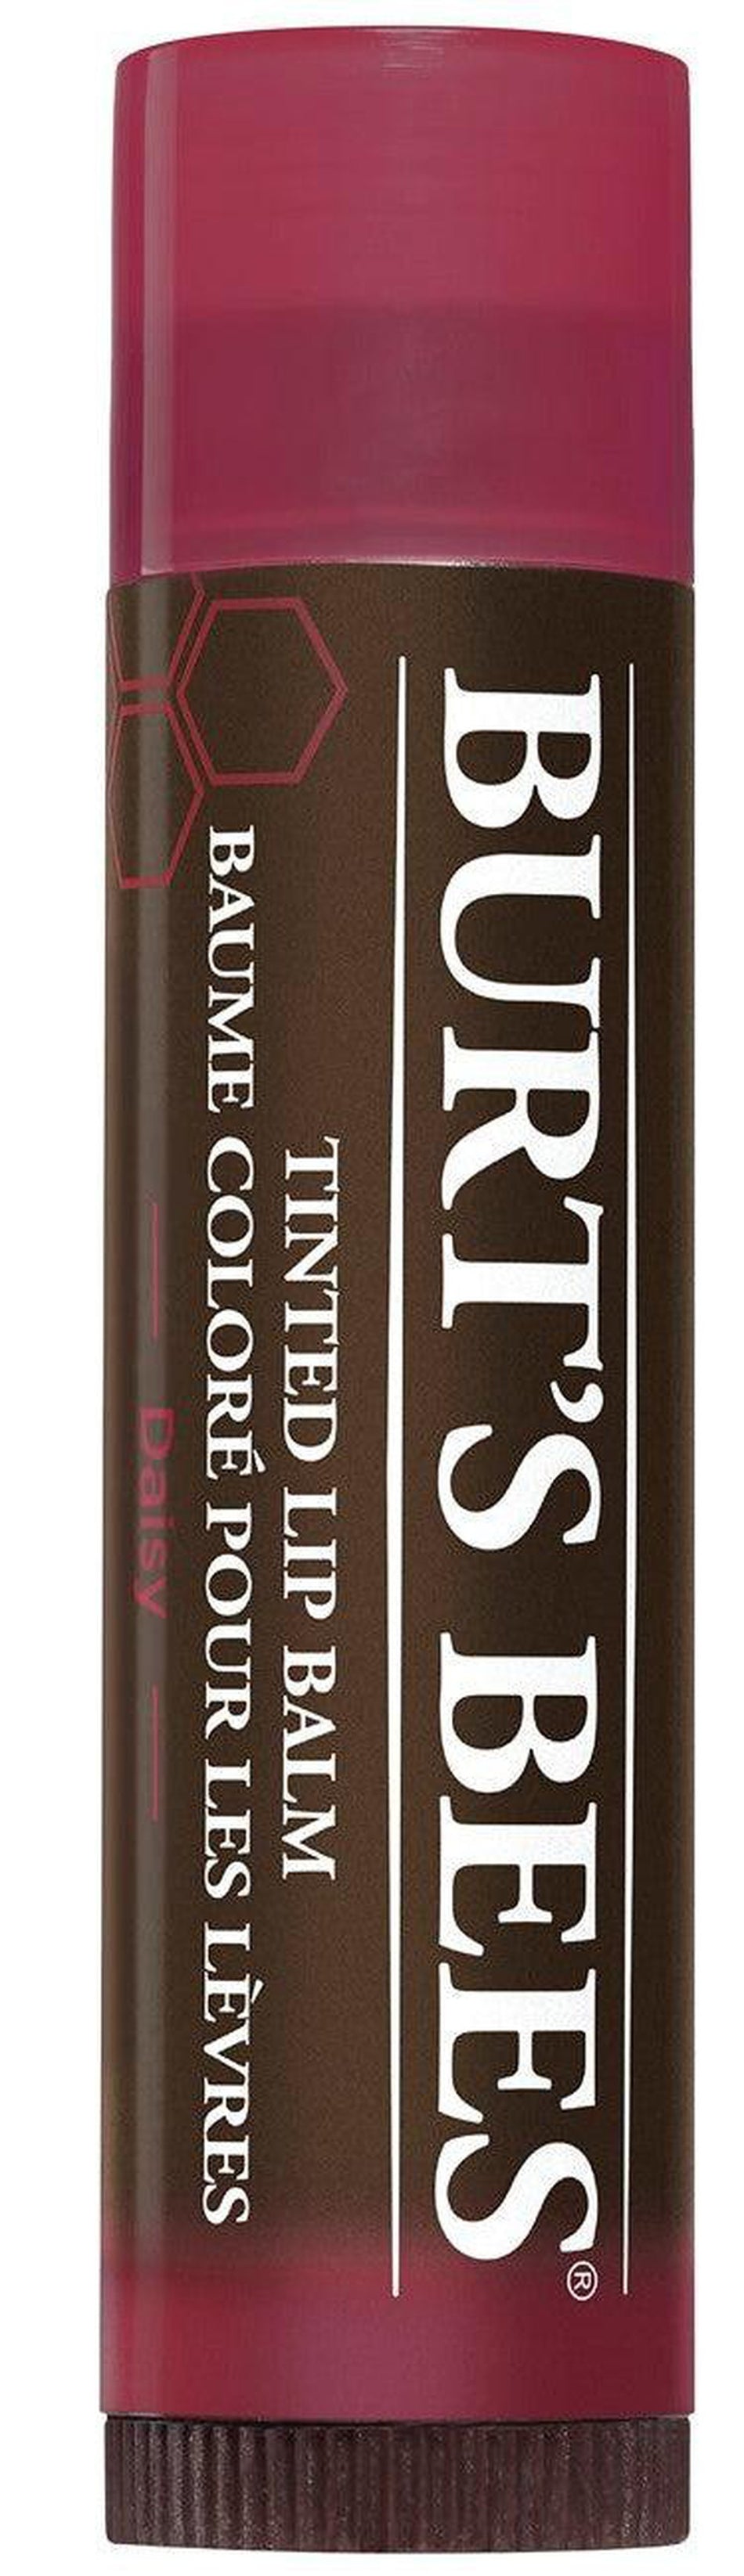 Burts Bees Tinted Lip Balm - Daisy 4.25g- Lillys Pharmacy and Health Store